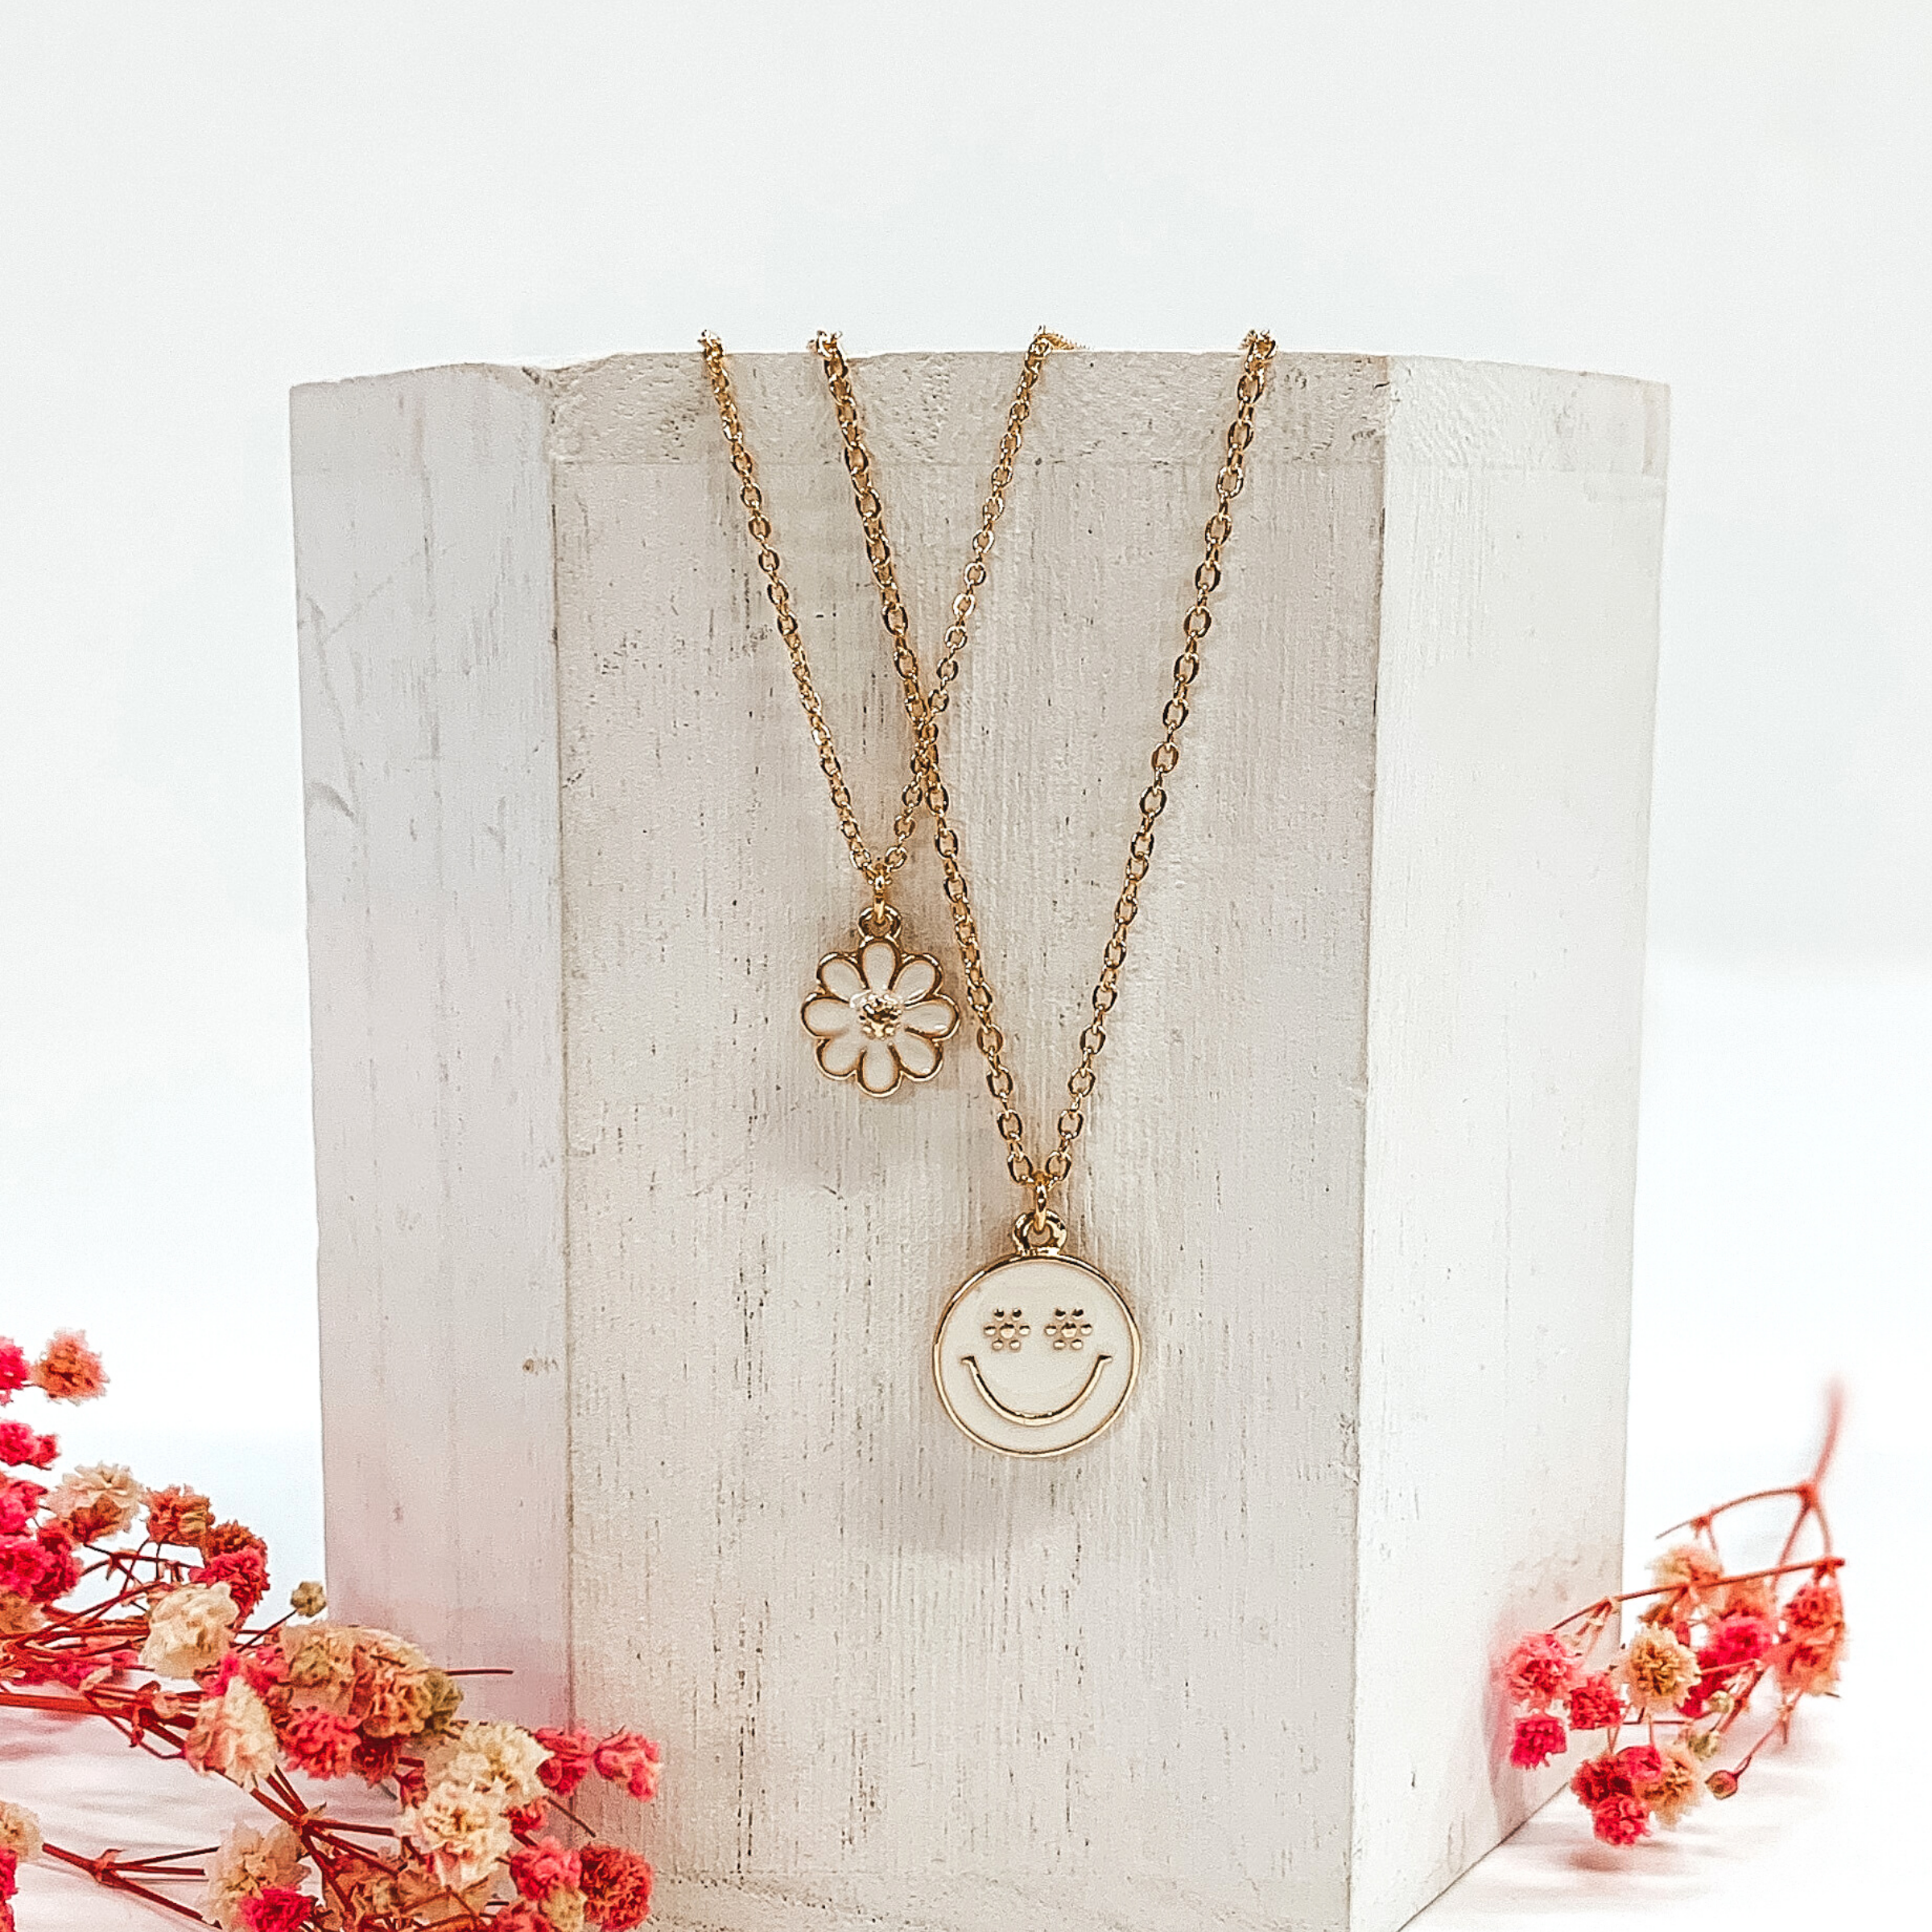 Gold double chained necklace. One strand has a white flower pendant and the other strand is longer and has a white circle pendant with a gold smiley face. This necklace is pictured laying on a white block on a white background with pink baby breath flowers at the bottom of the picture. 